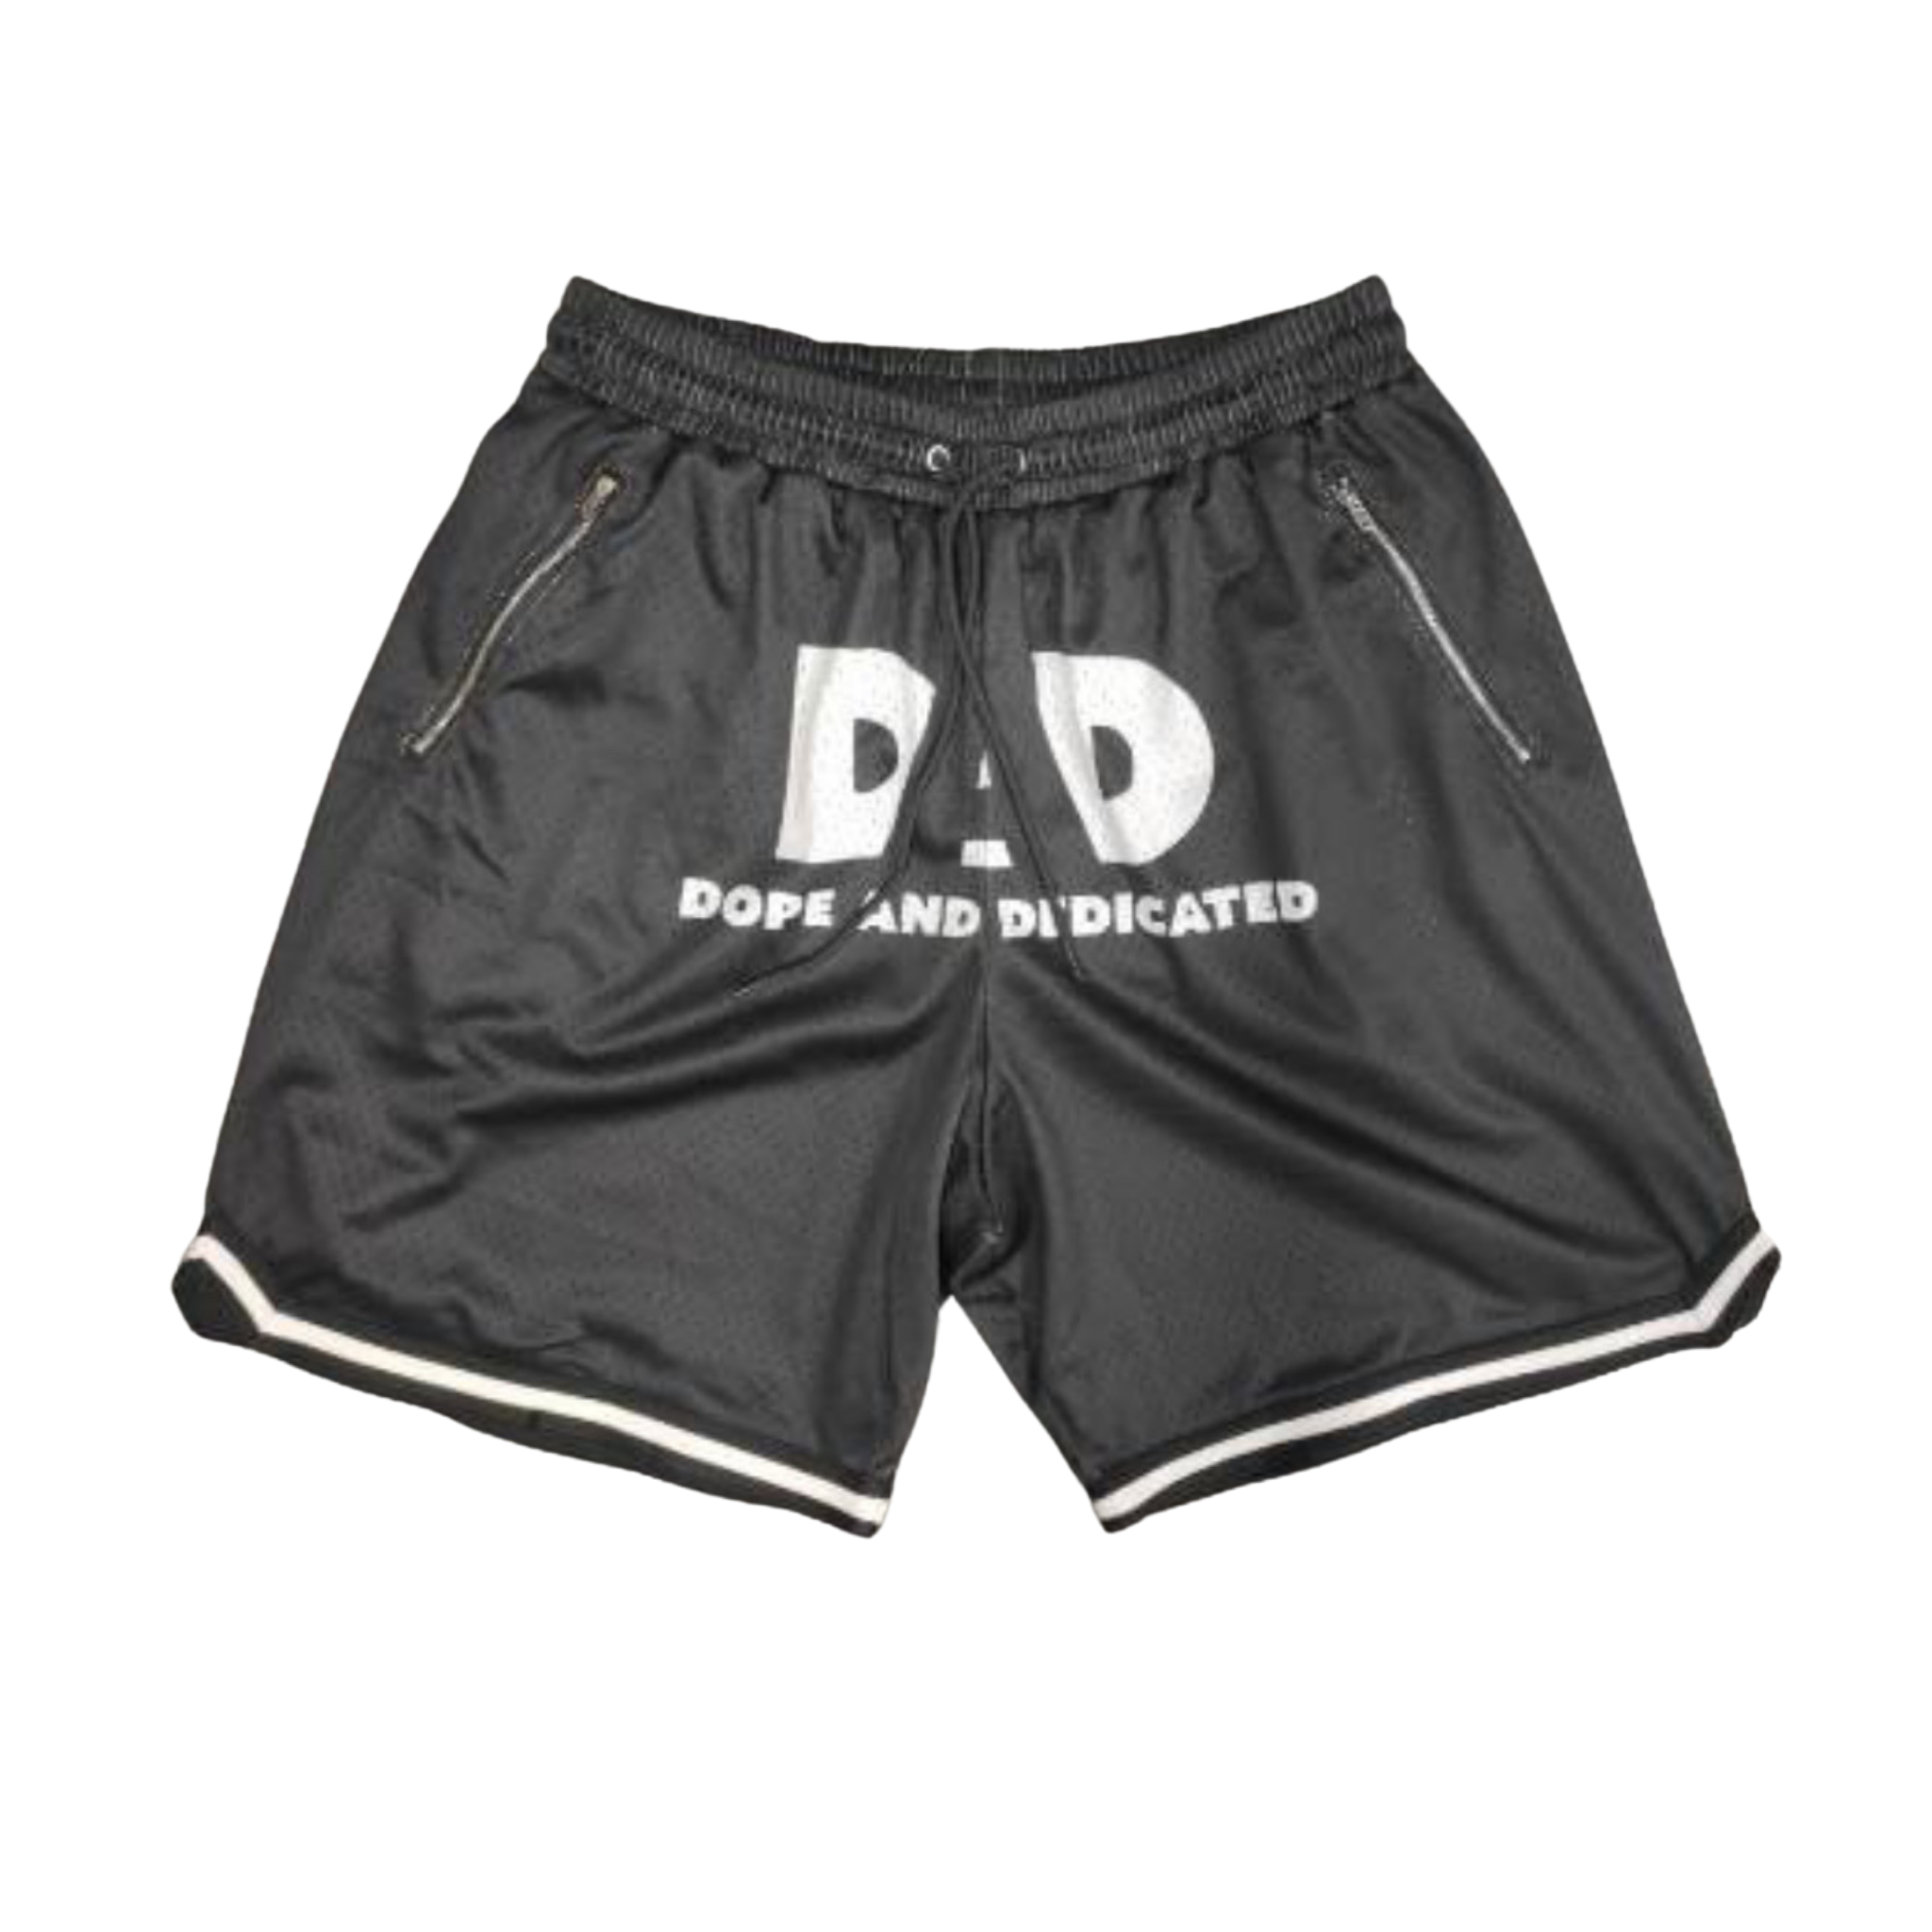 Dope Dad Shorts - Black - Dope And Dedicated